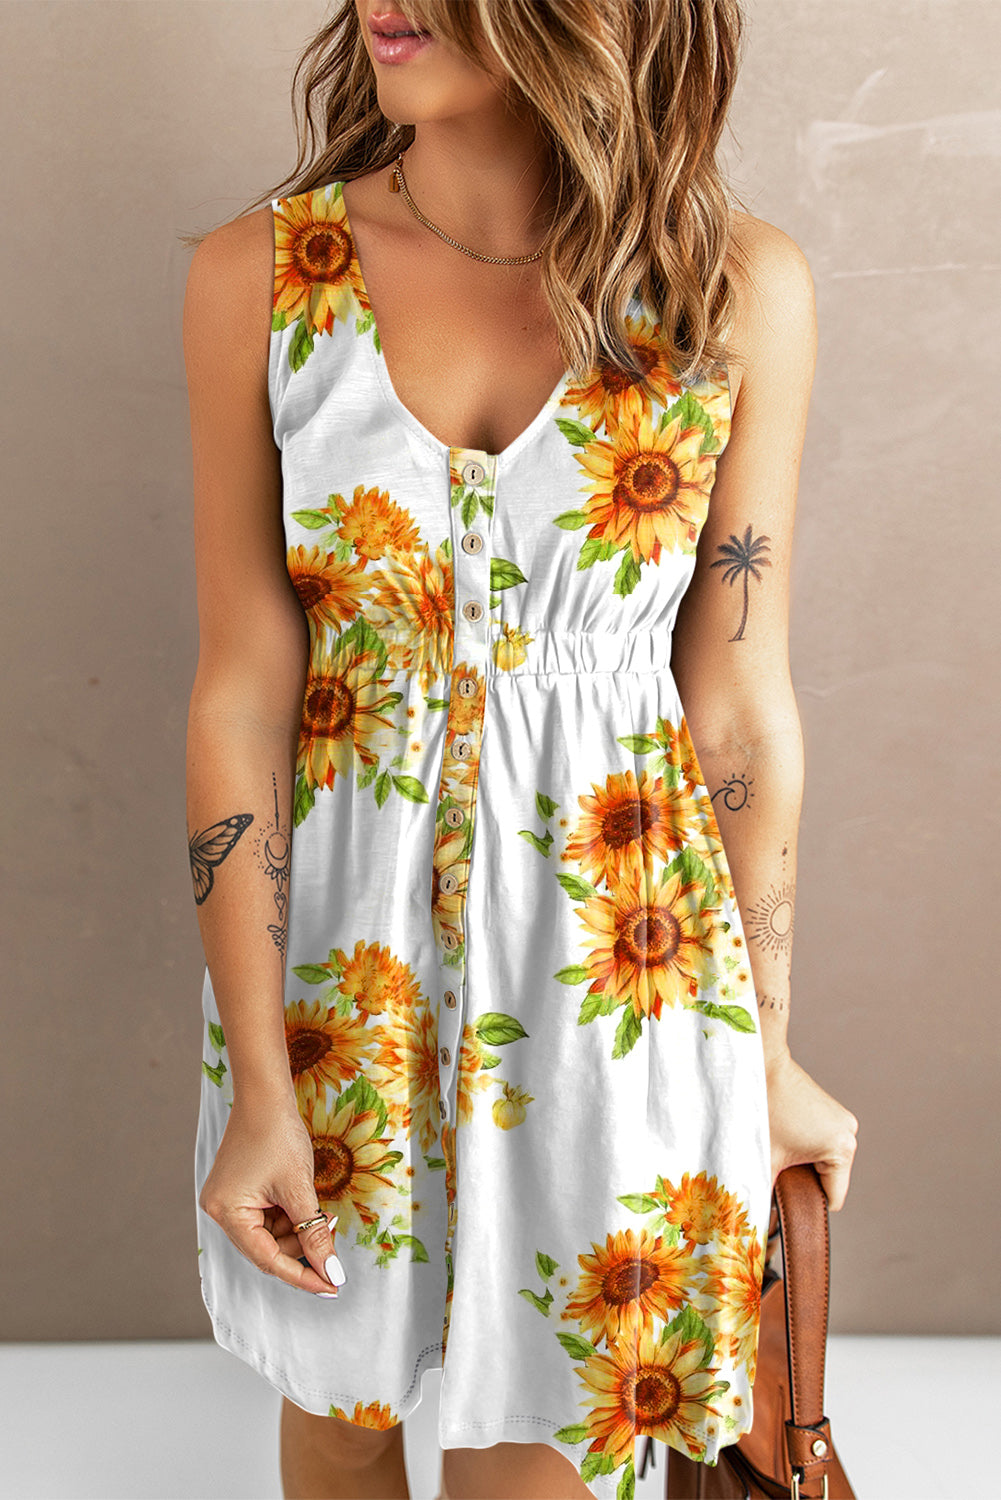 Sunflower Dress - The Lakeside Boutique